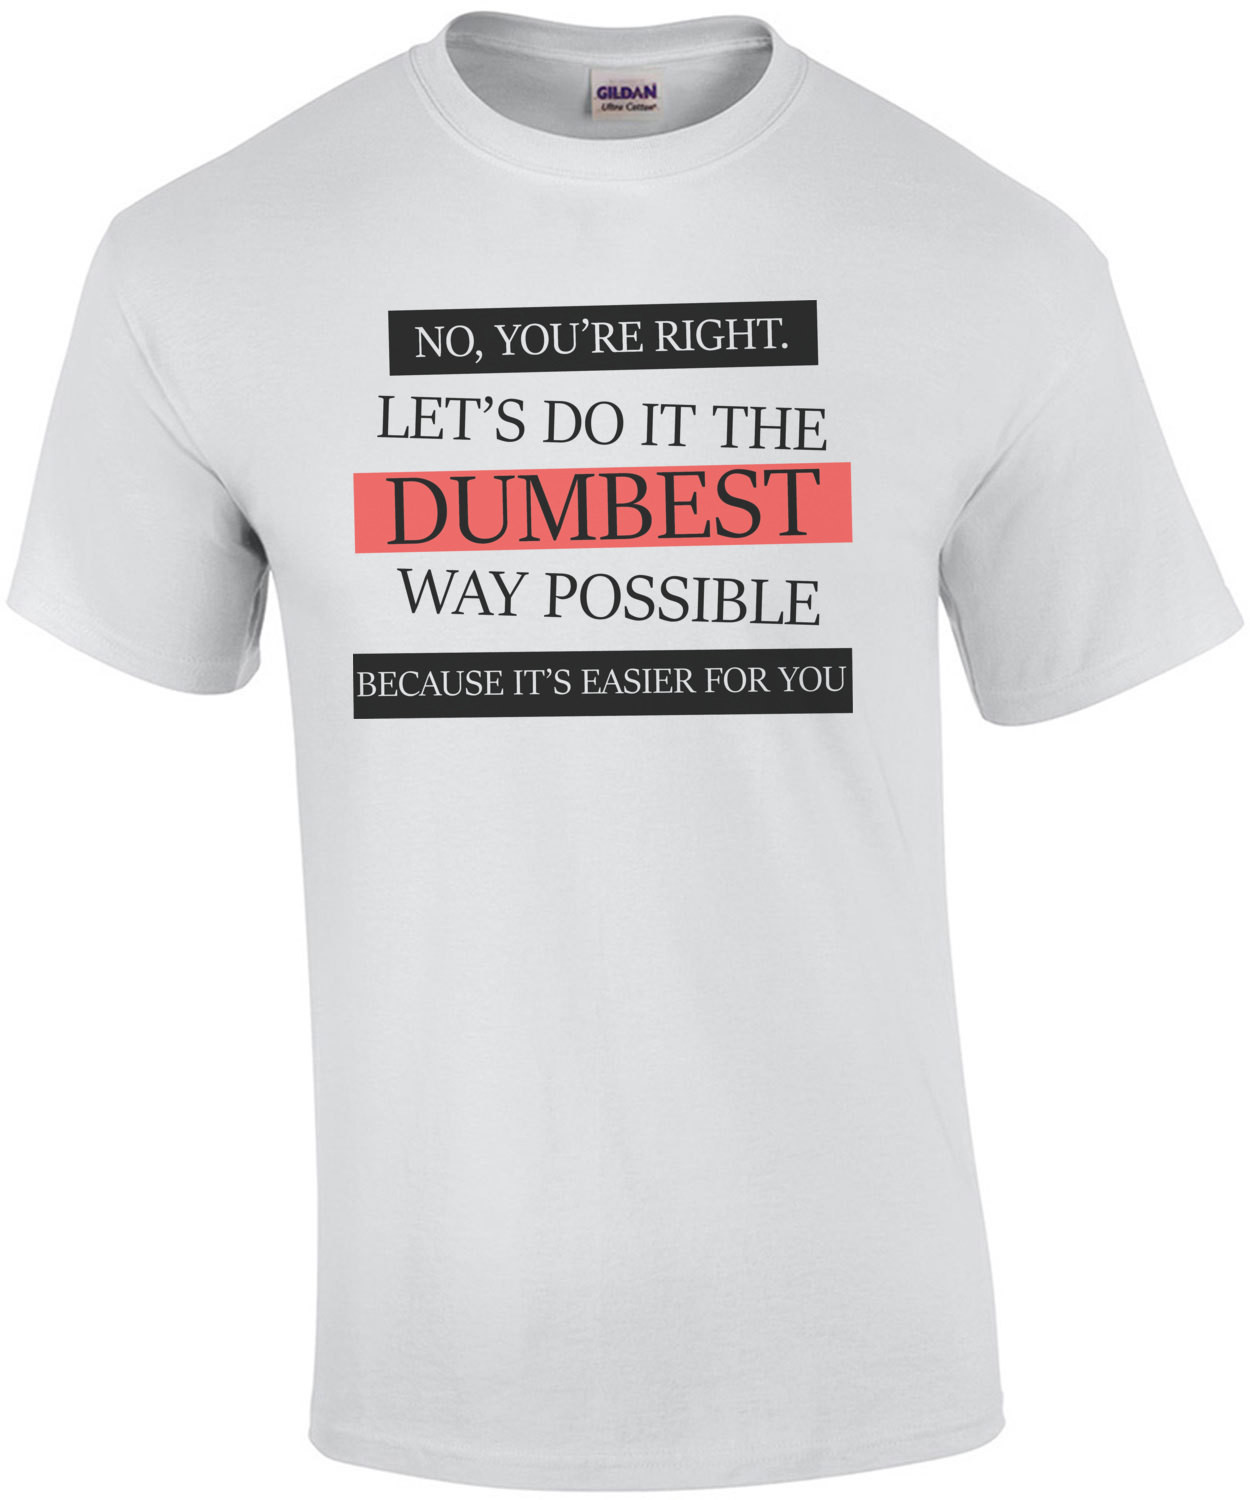 No, you're right. Let's do it the dumbest way possible. funny t-shirt